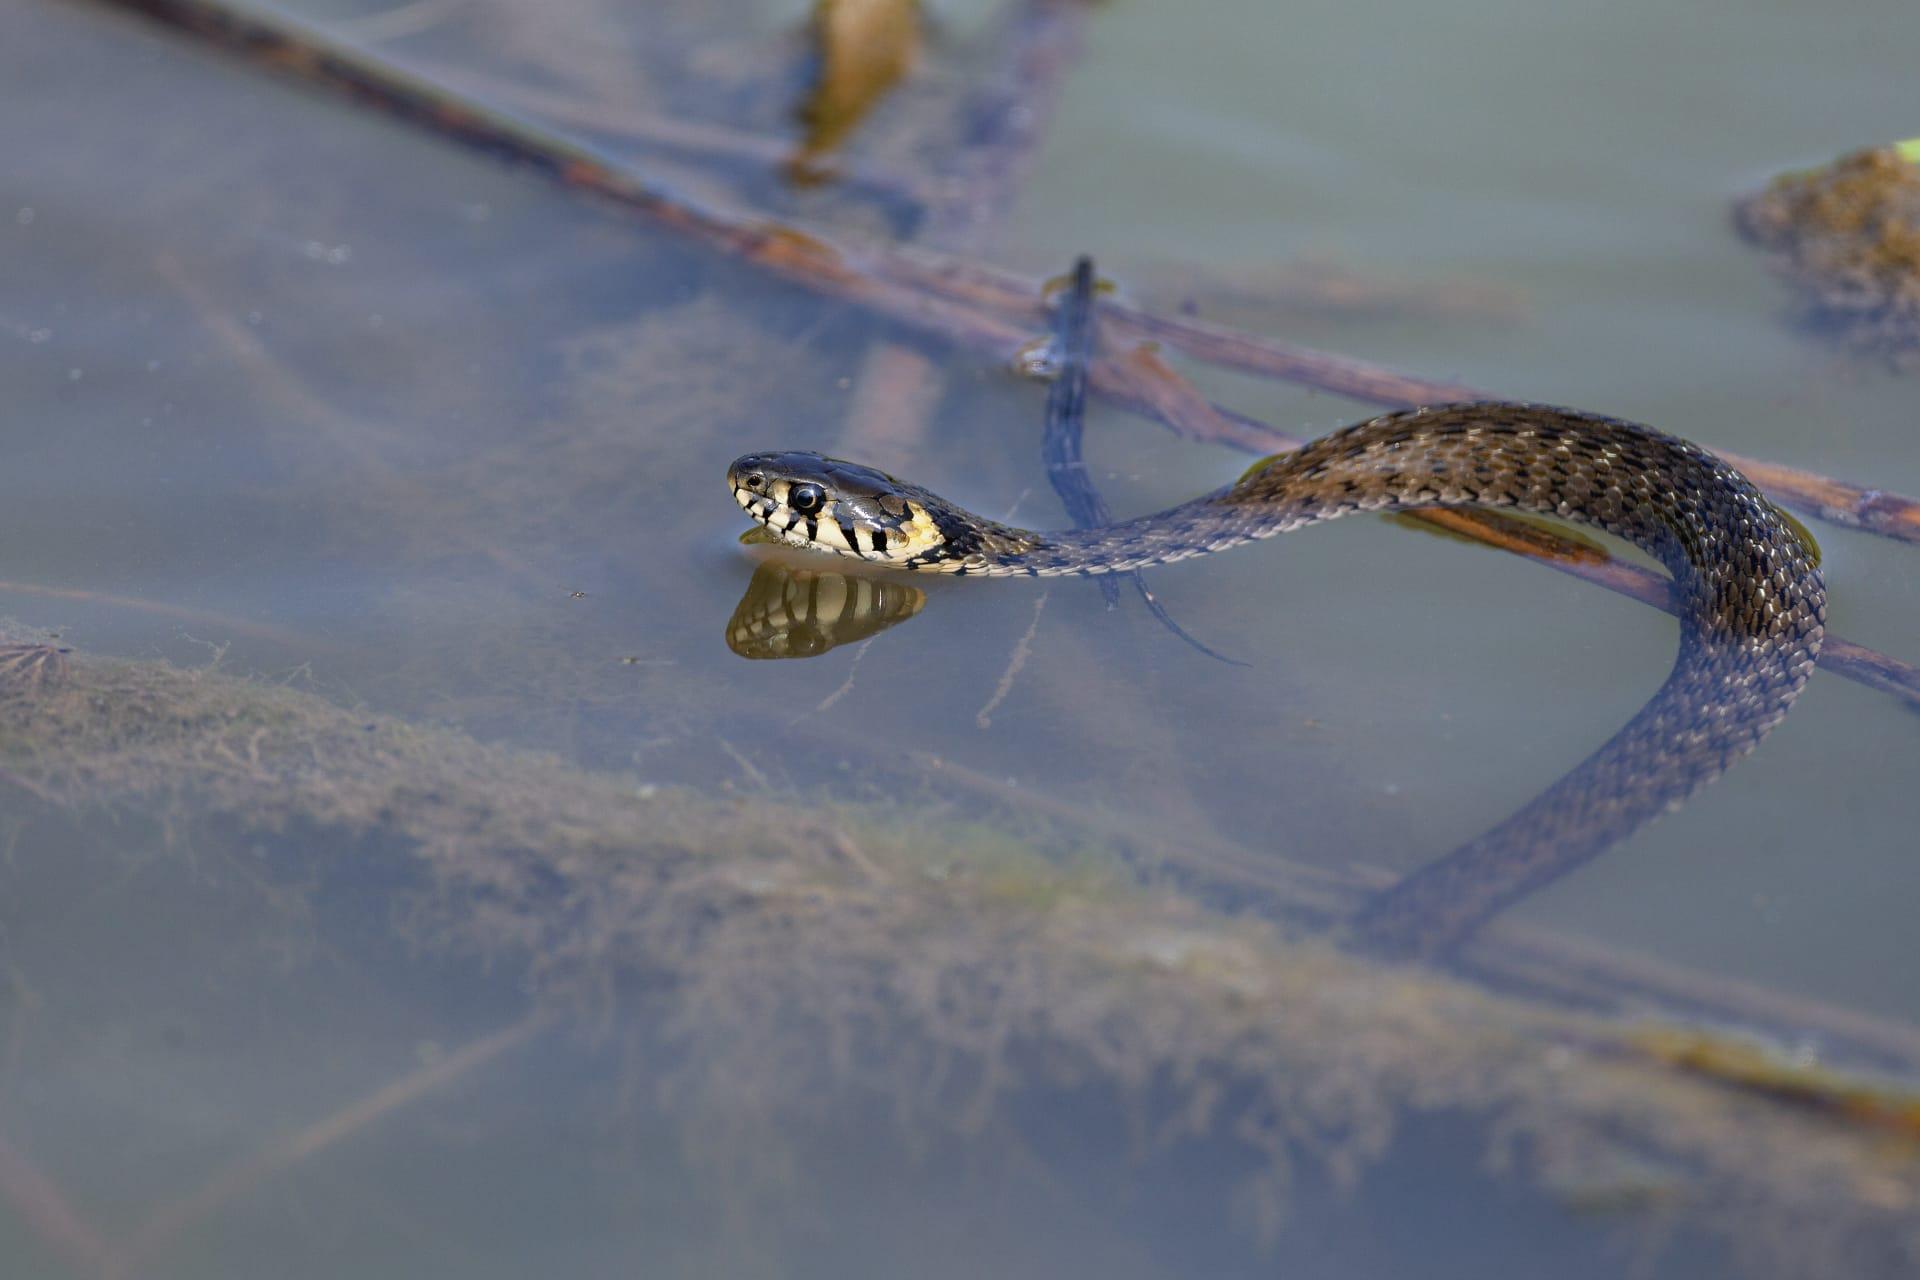 Watersnake pictures